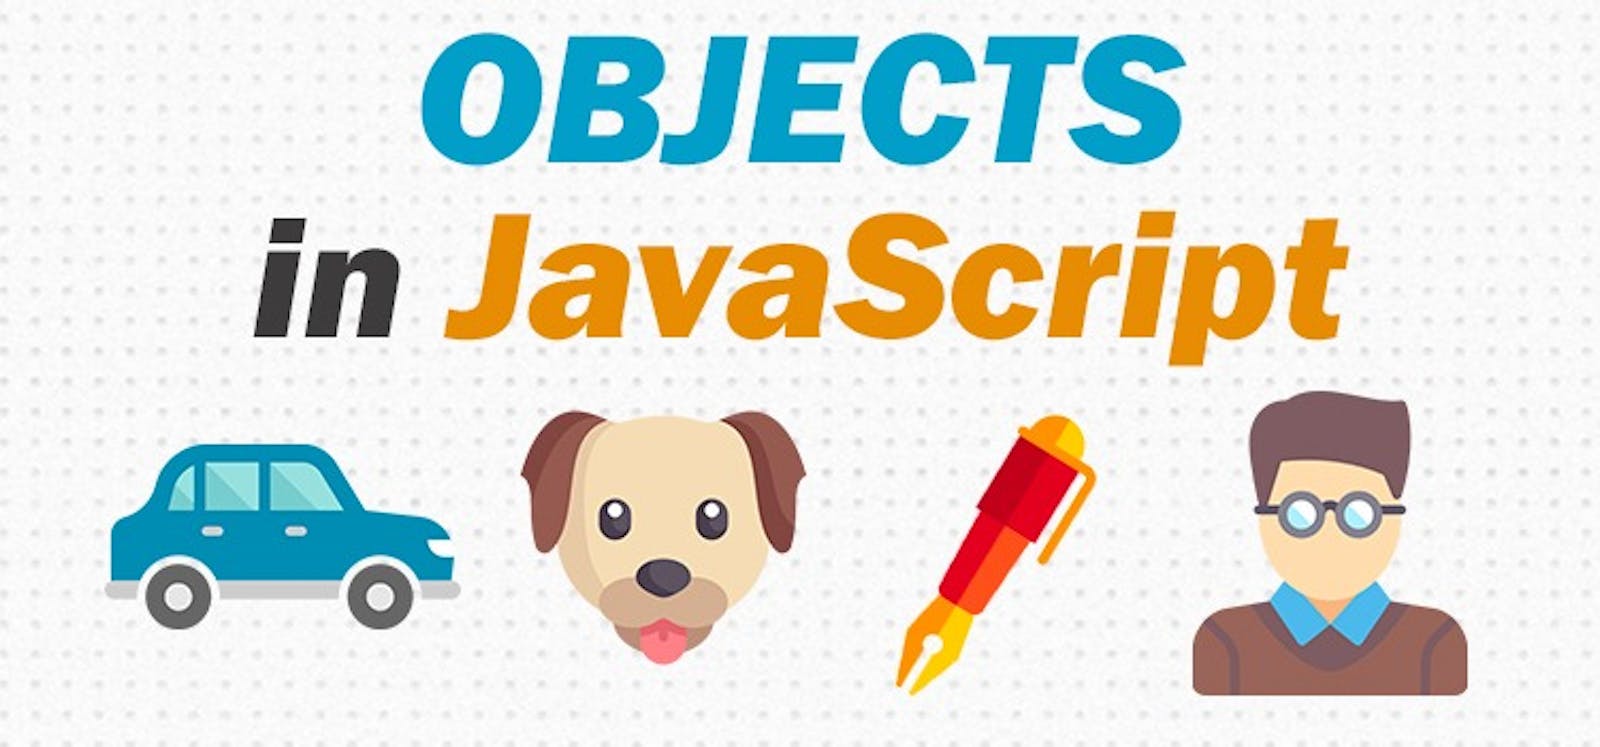 JavaScript Objects For Beginners.